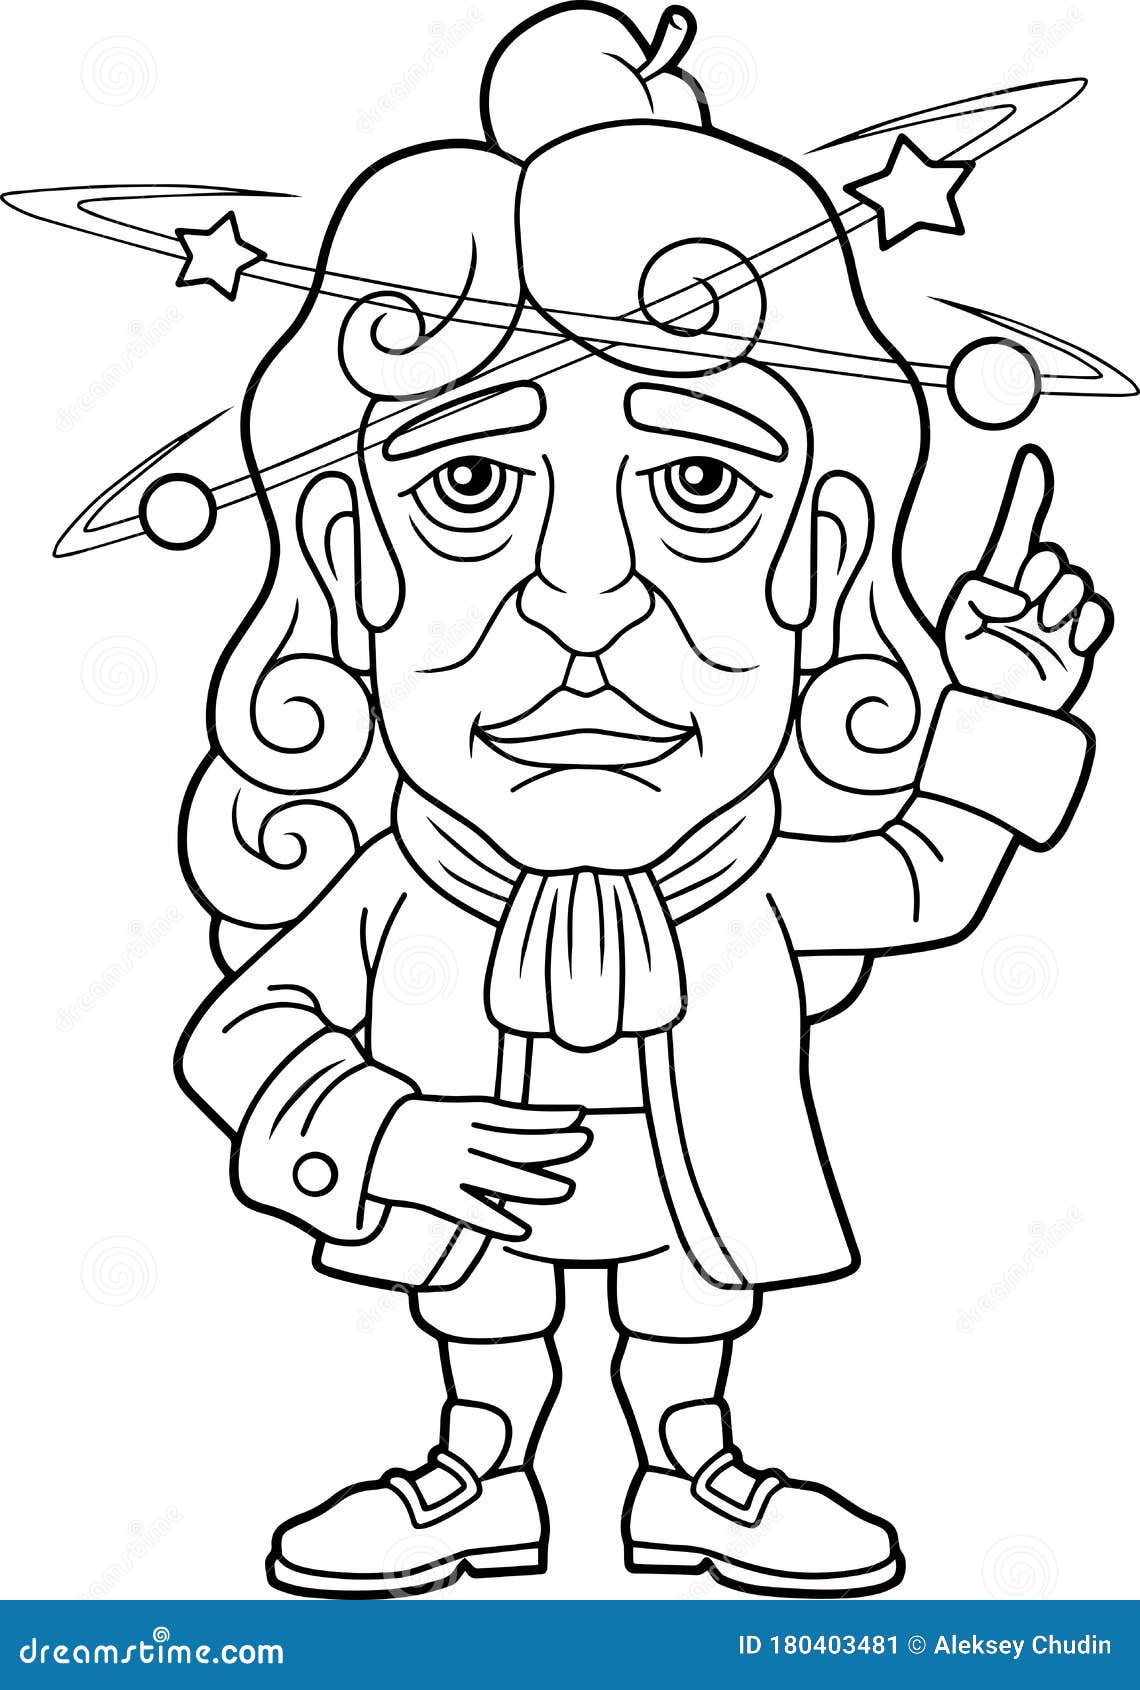 Scientist physicist isaac newton coloring book funny illustration stock vector